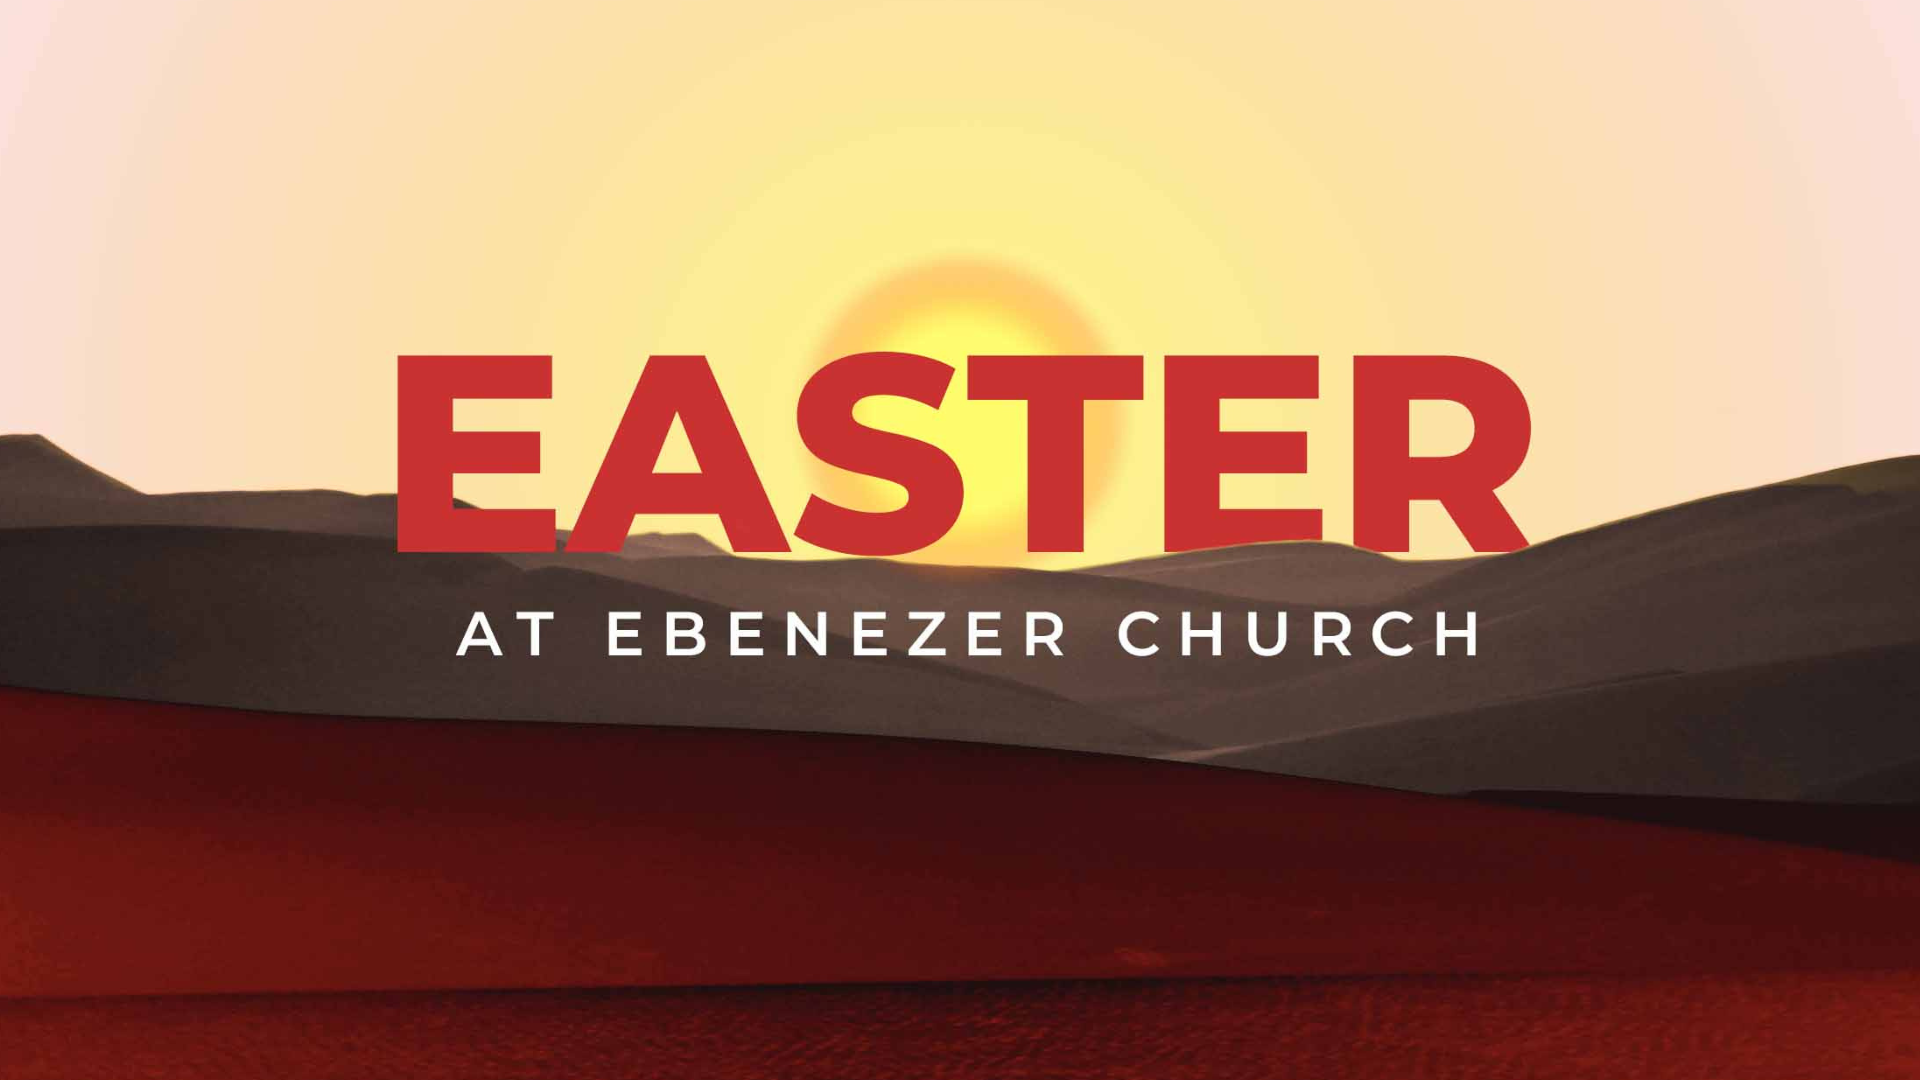 <h1 class="tribe-events-single-event-title">Easter at Ebenezer Church</h1>